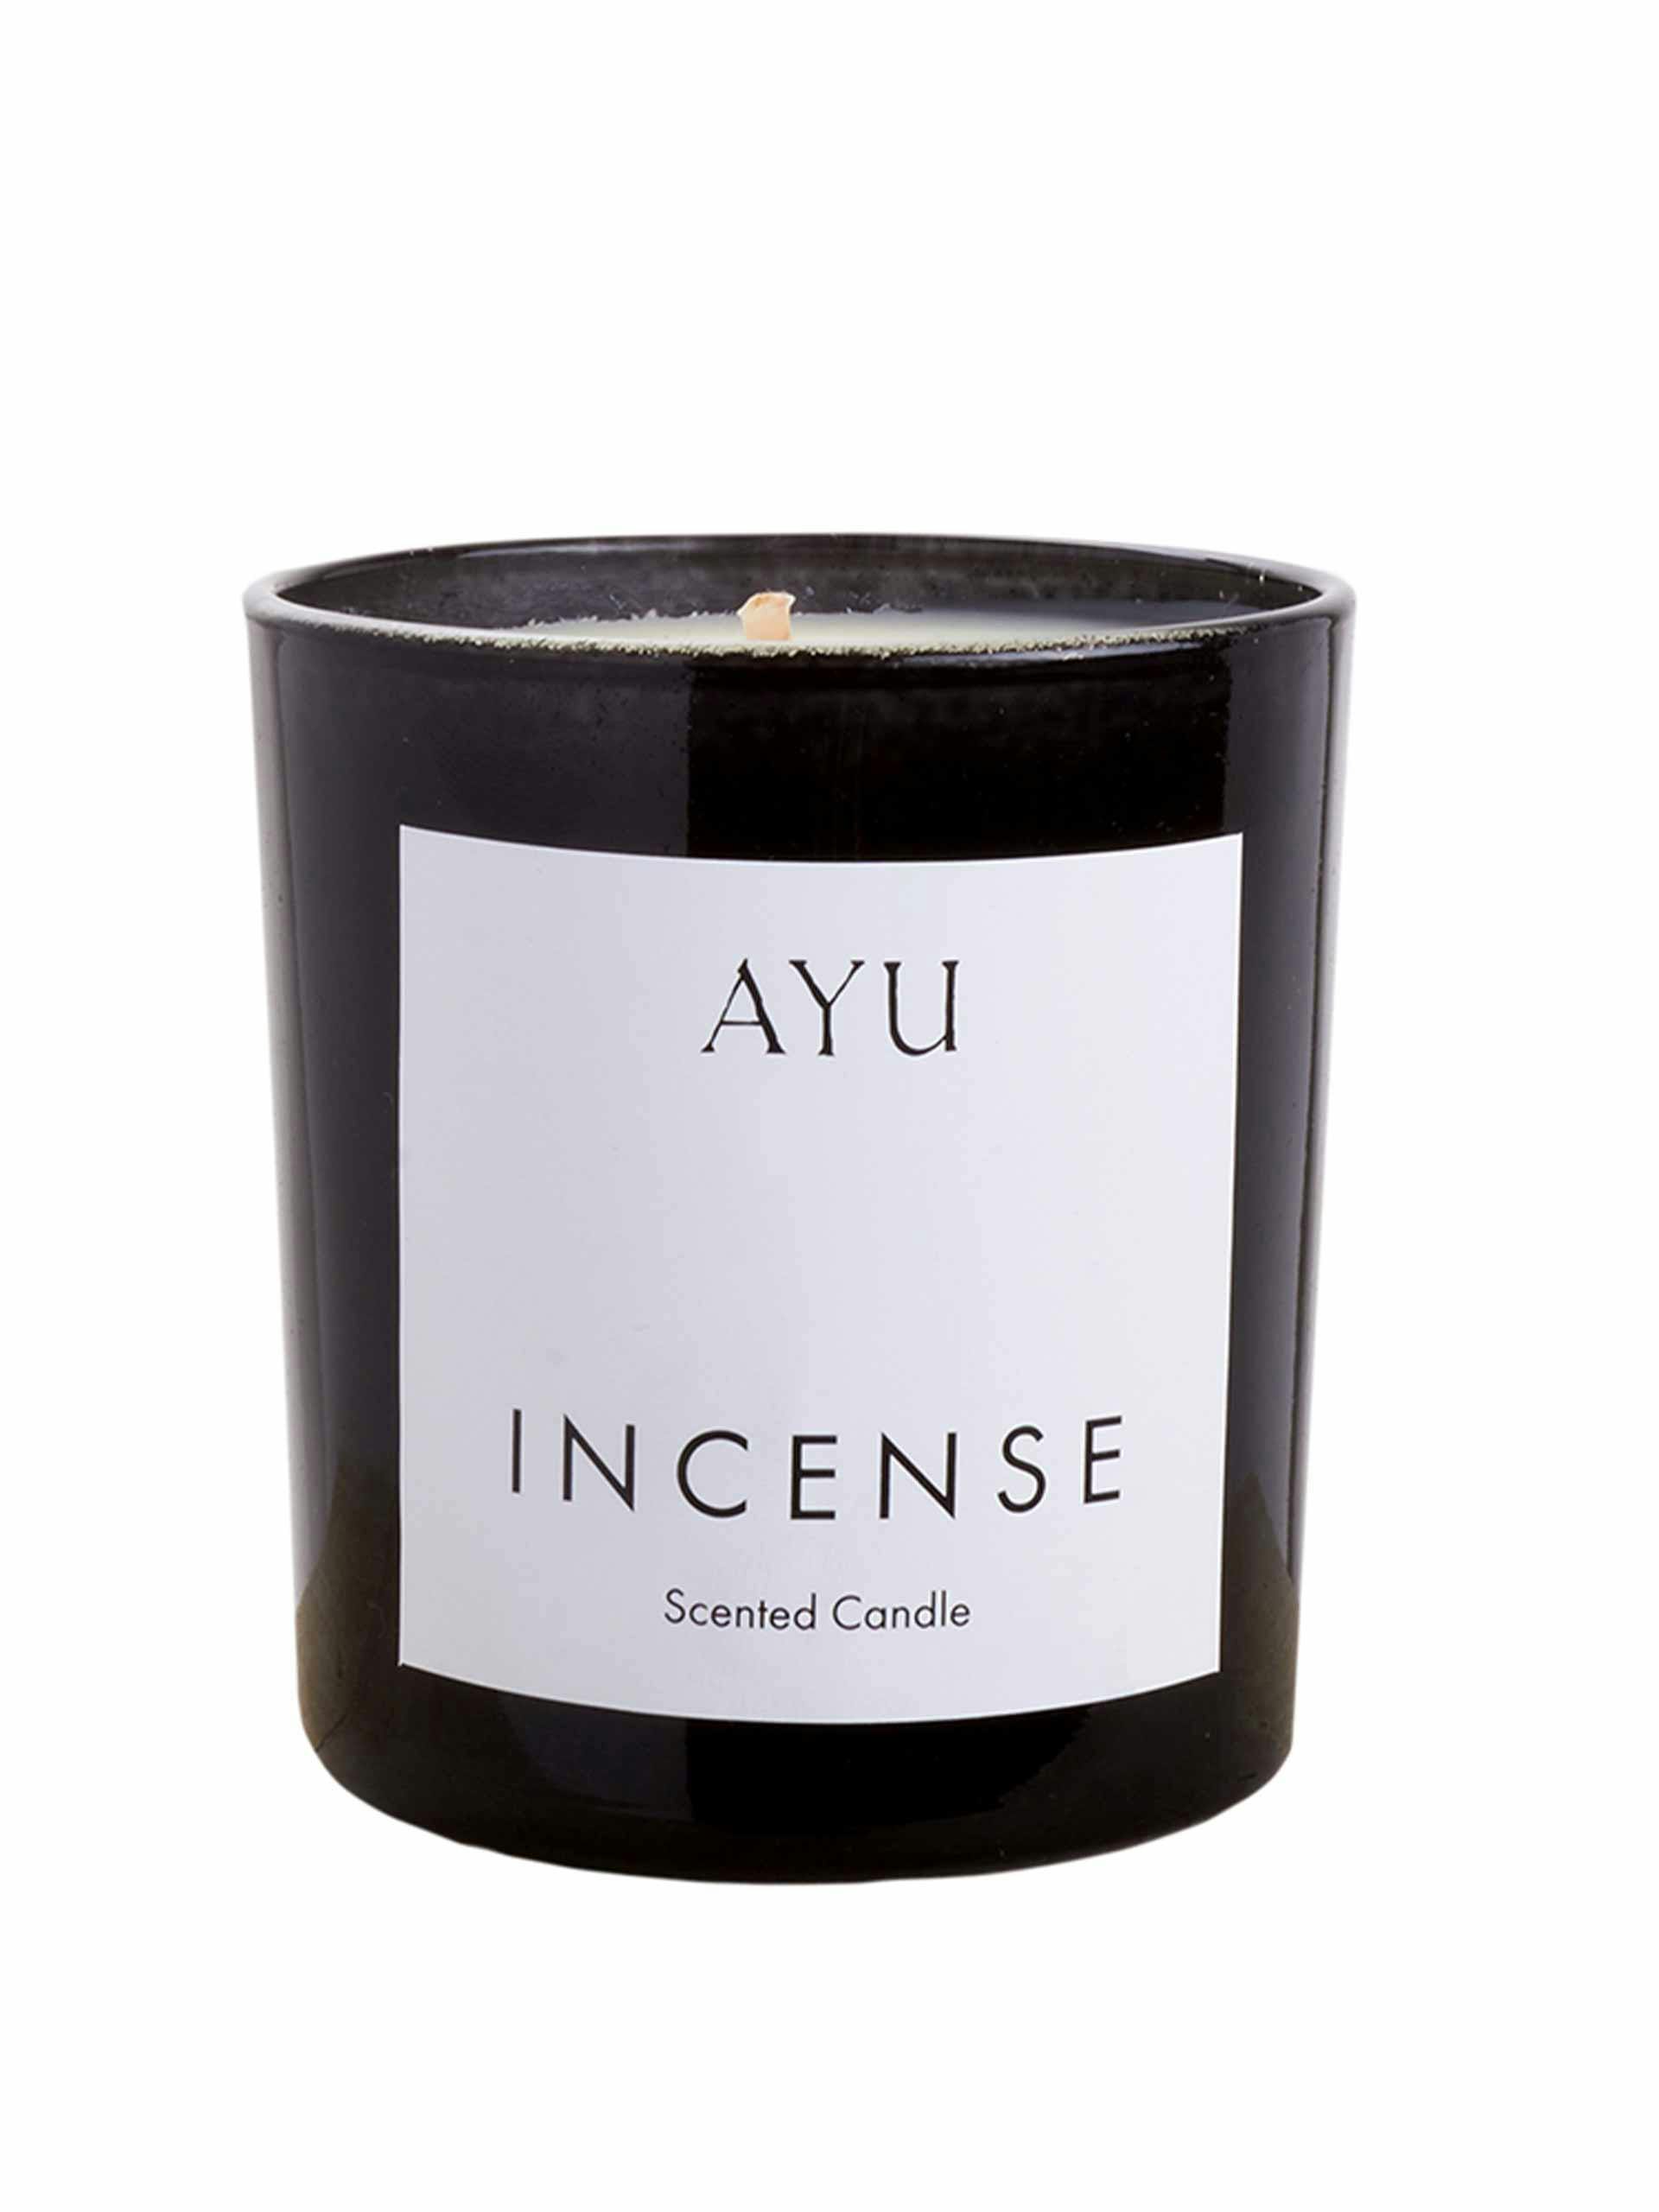 Incense candle